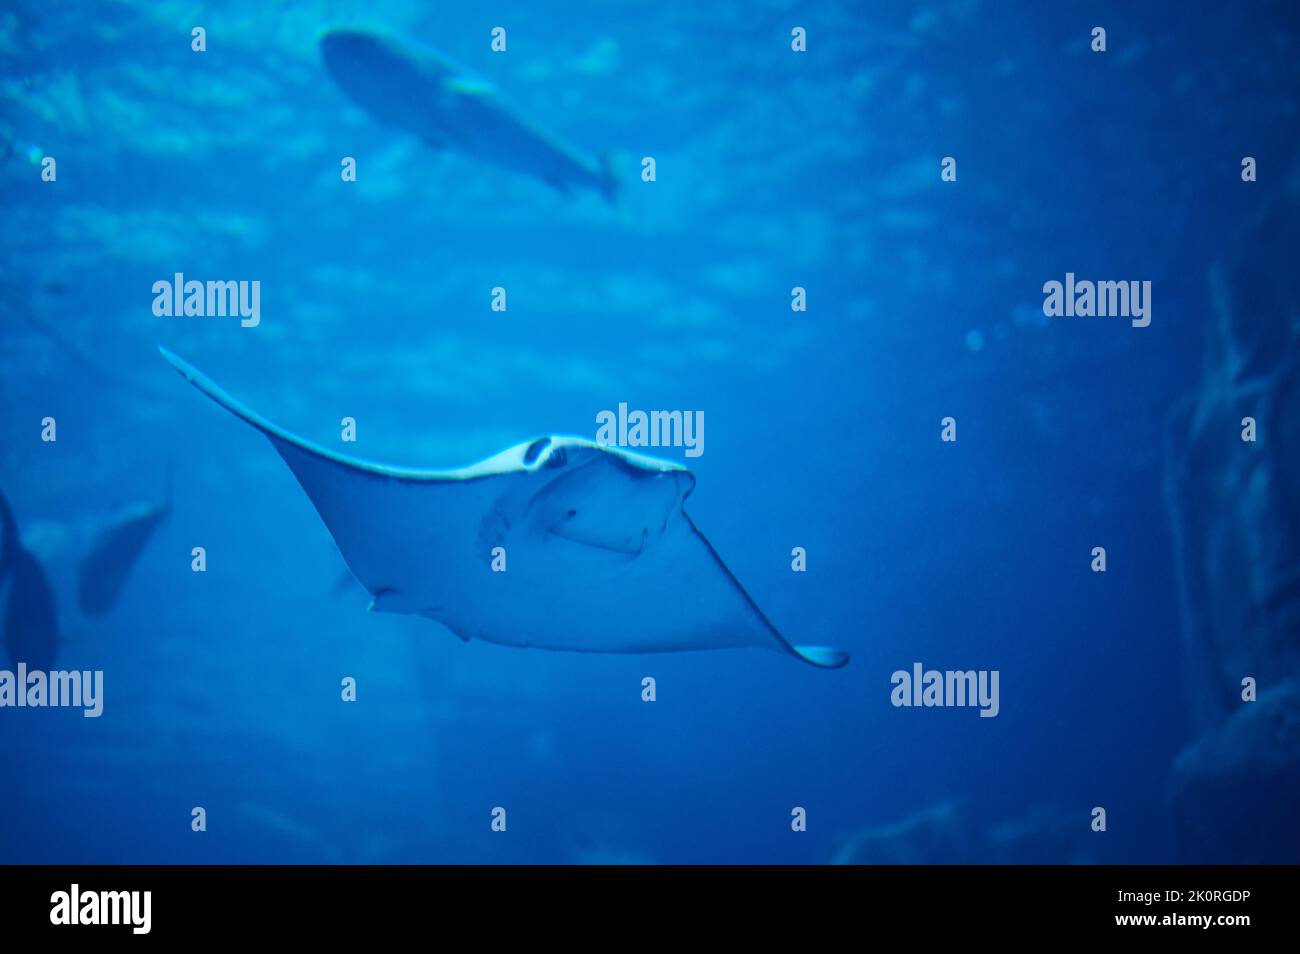 Stingray swim in deep blue water background close up view Stock Photo